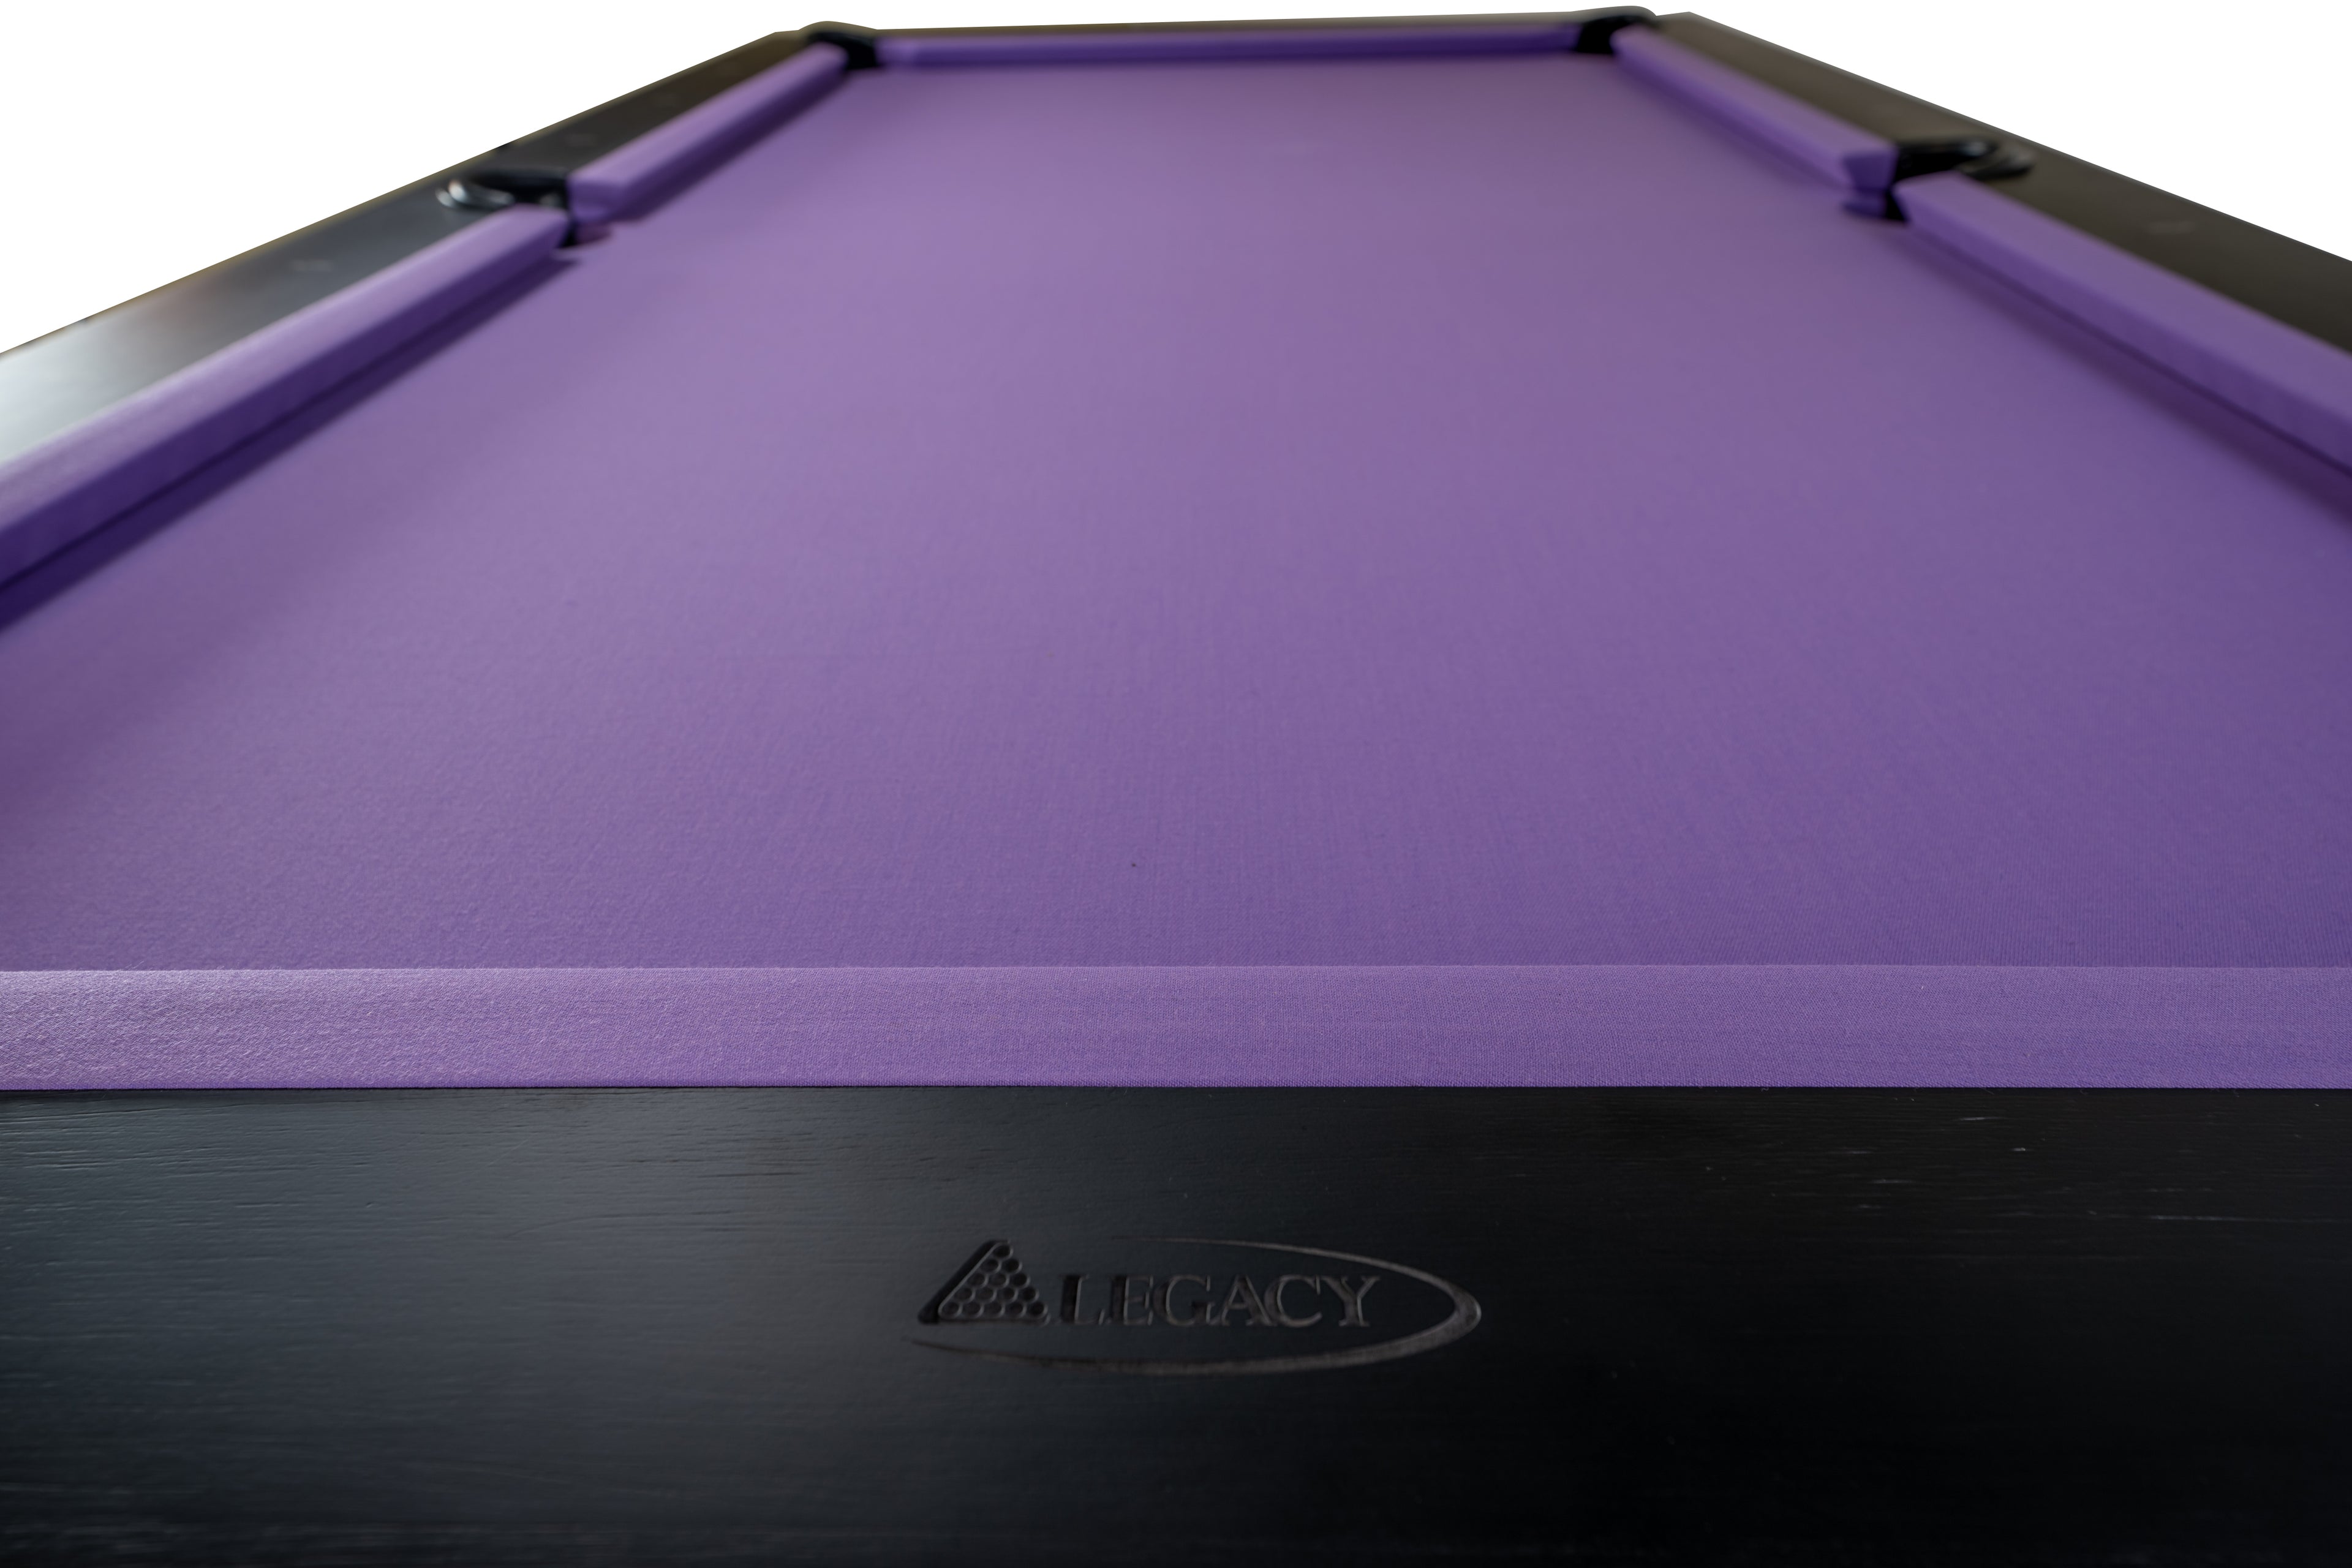 Legacy Billiards Tellico 8 Ft Pool Table in Raven Finish End View Closeup